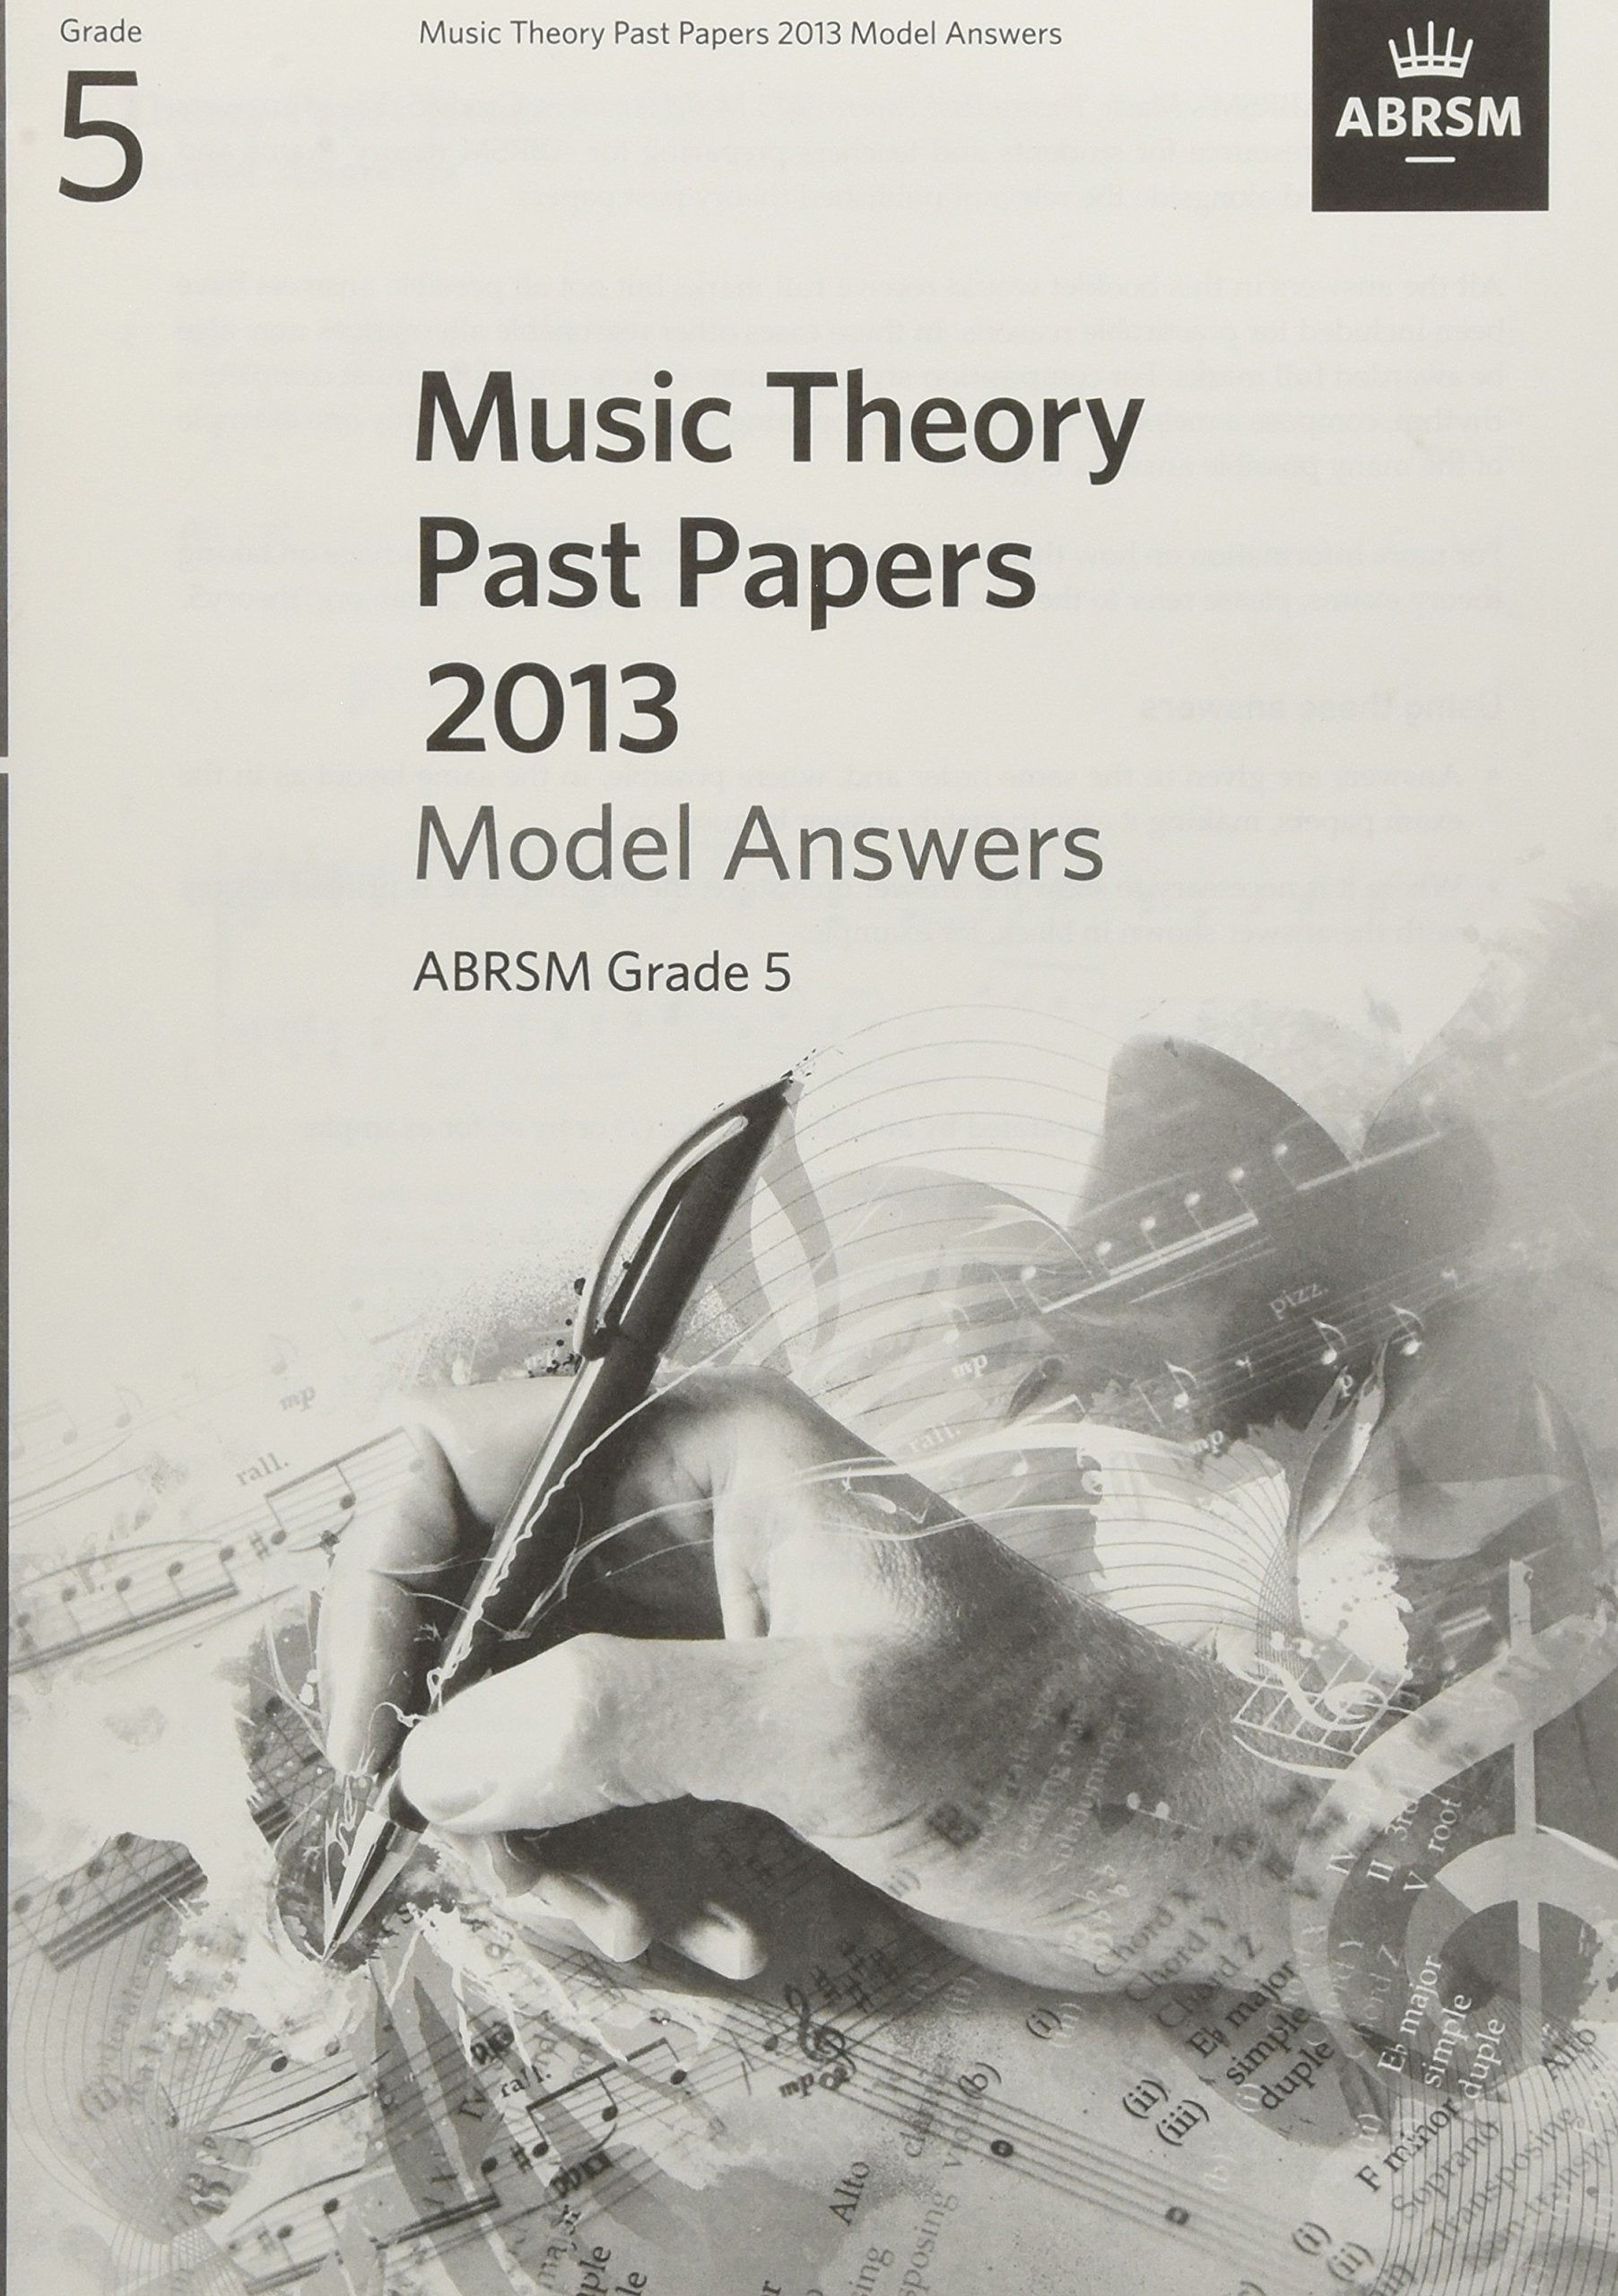 Music Theory Past Papers 2013 Model Answers, ABRSM Grade 5